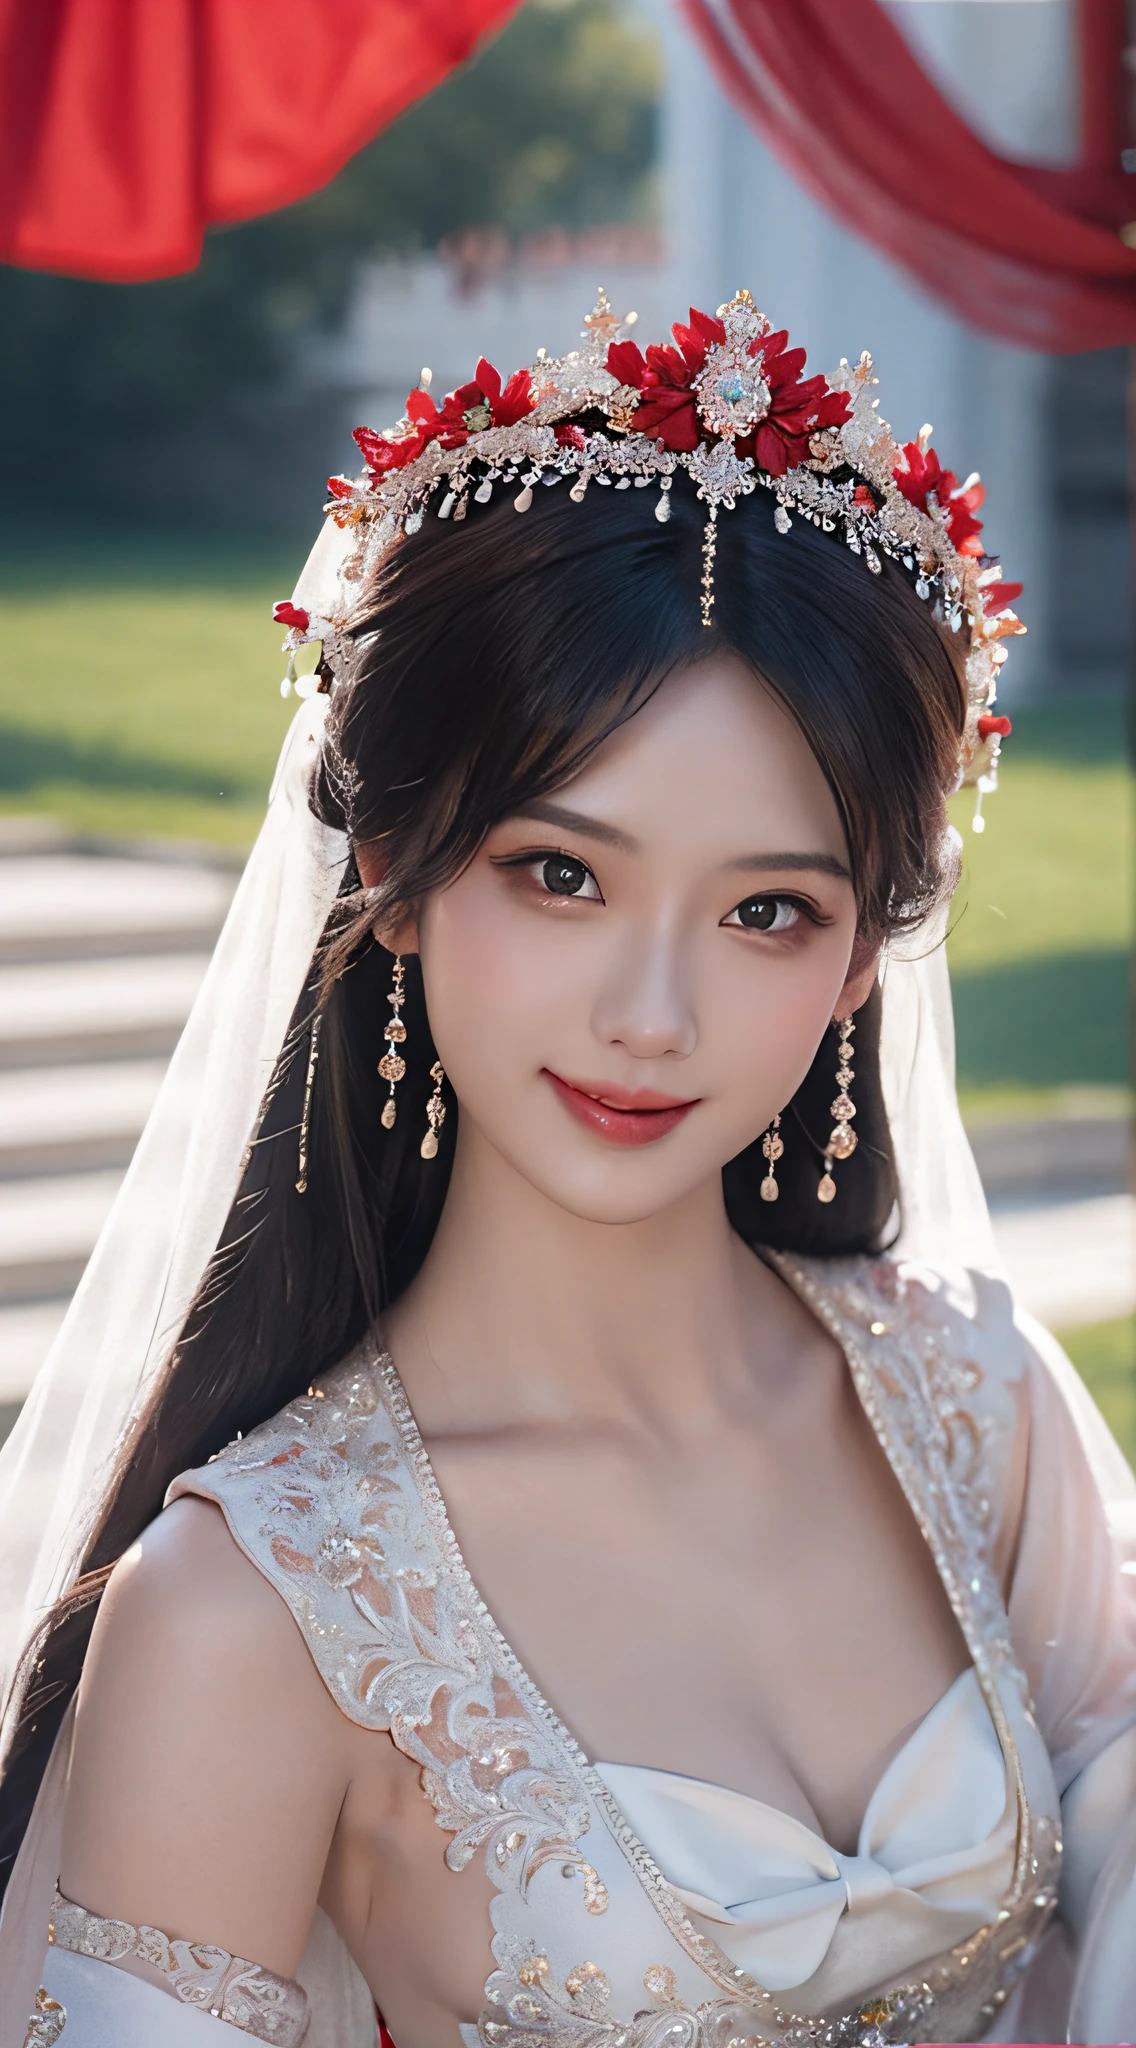 Wedding beauty, character details refinement, wedding dress detail refinement, photomicrograph, high angle, soft light photo, oriental classical beauty, hair bundle, towering headdress, red bridal wedding dress, red hijab, real three-dimensional, smile